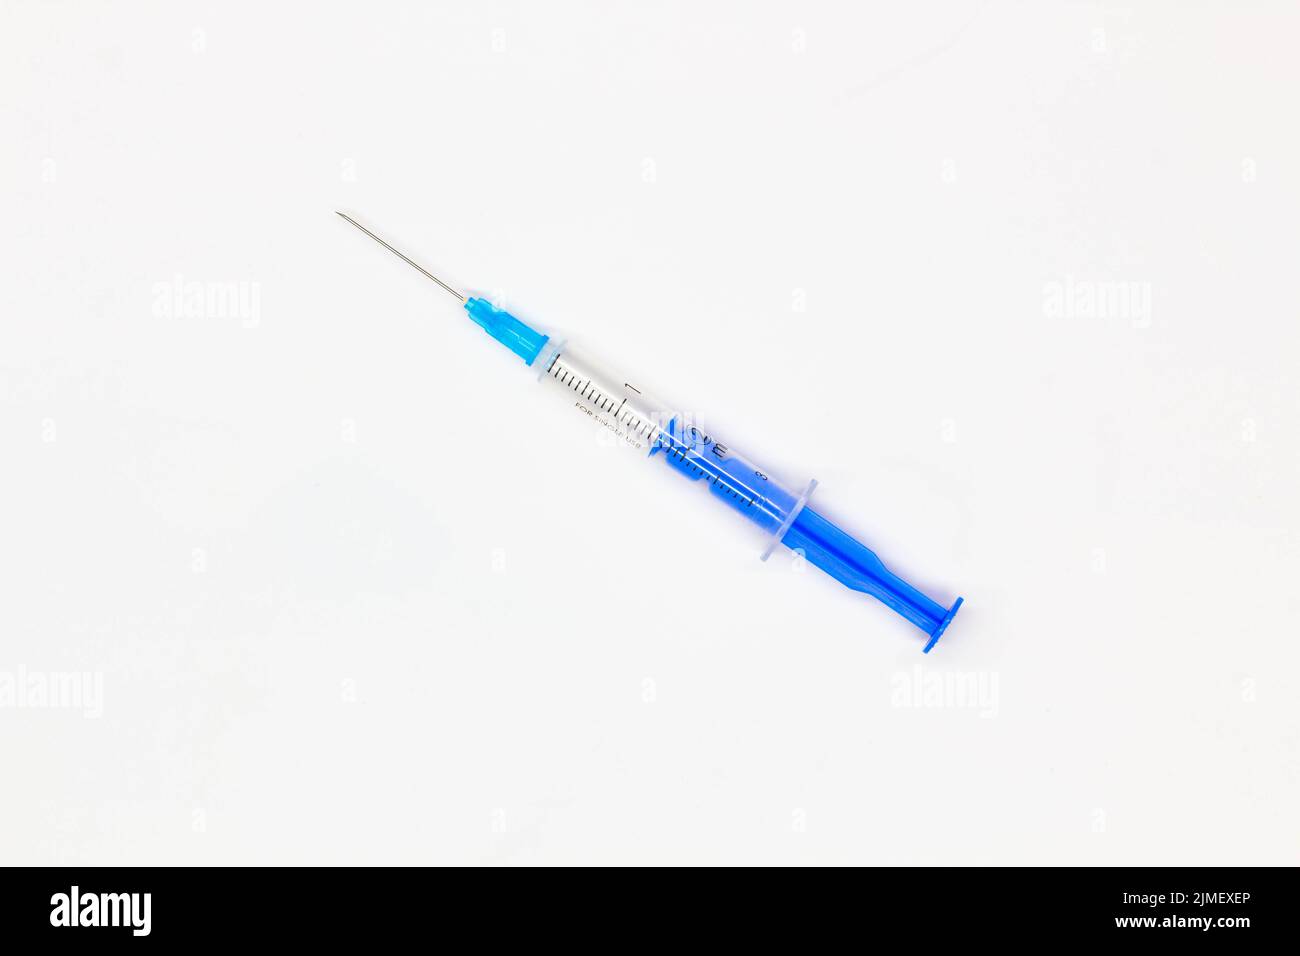 Blue medical disposable syringe for injection on a white background. Medical instrument for vaccination. 2 ml syringe for COVID-19 vaccine. Medical Stock Photo